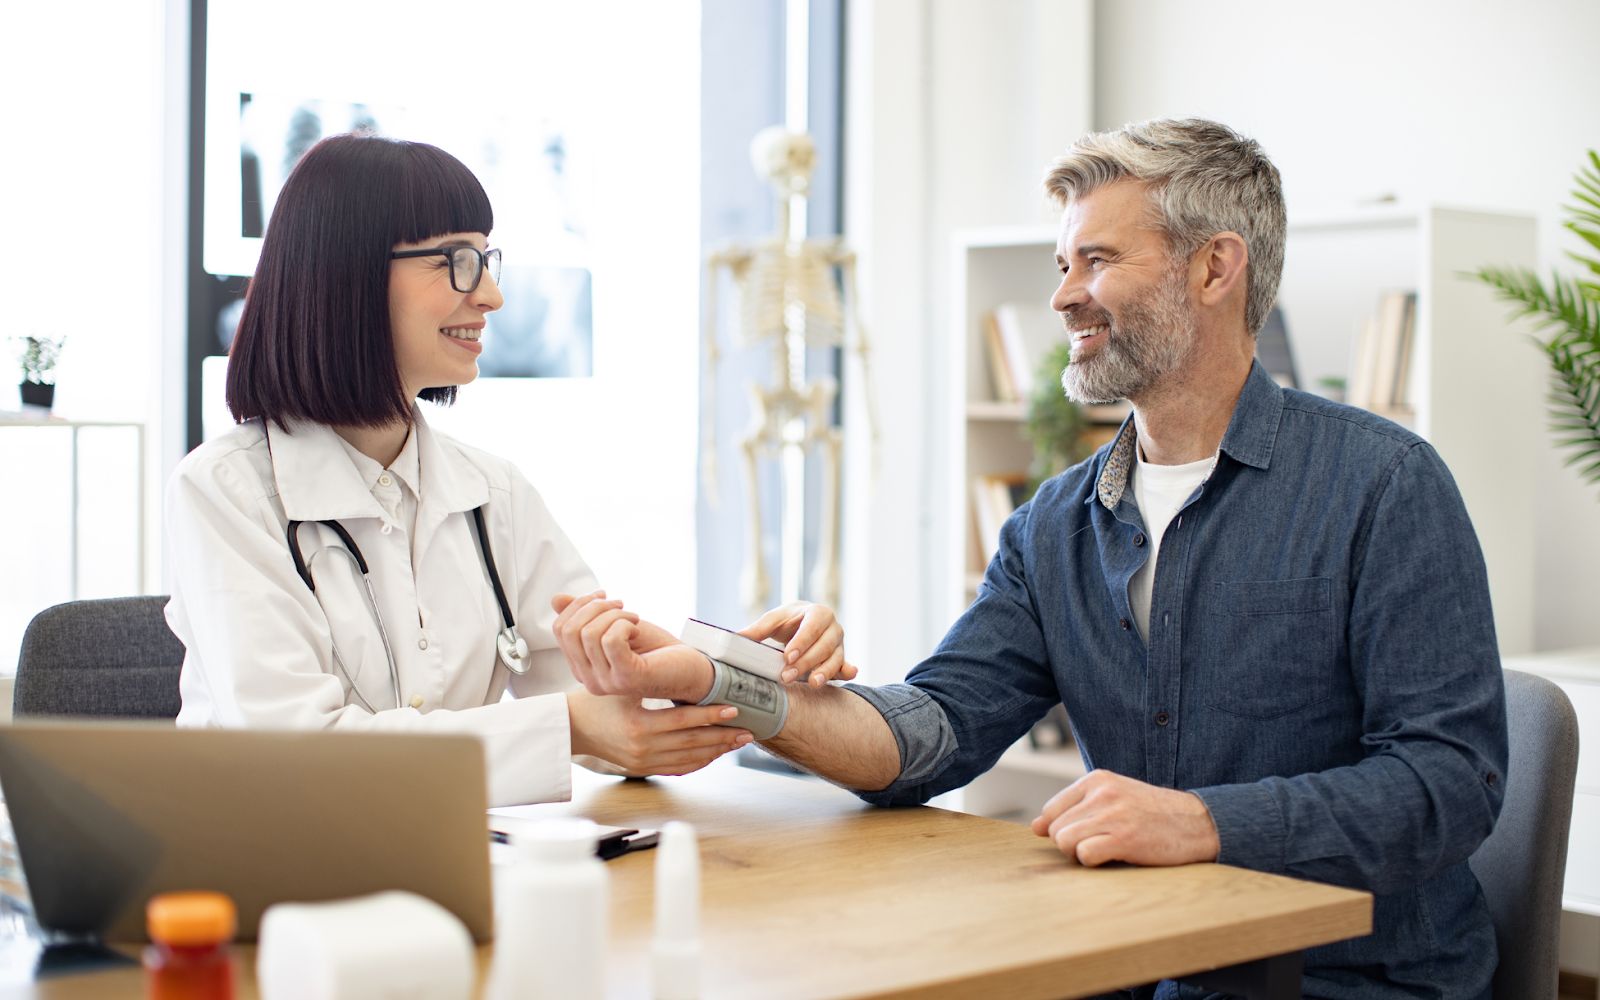 How to Increase Clinician Buy-In and Patient Referrals into Your RPM Program